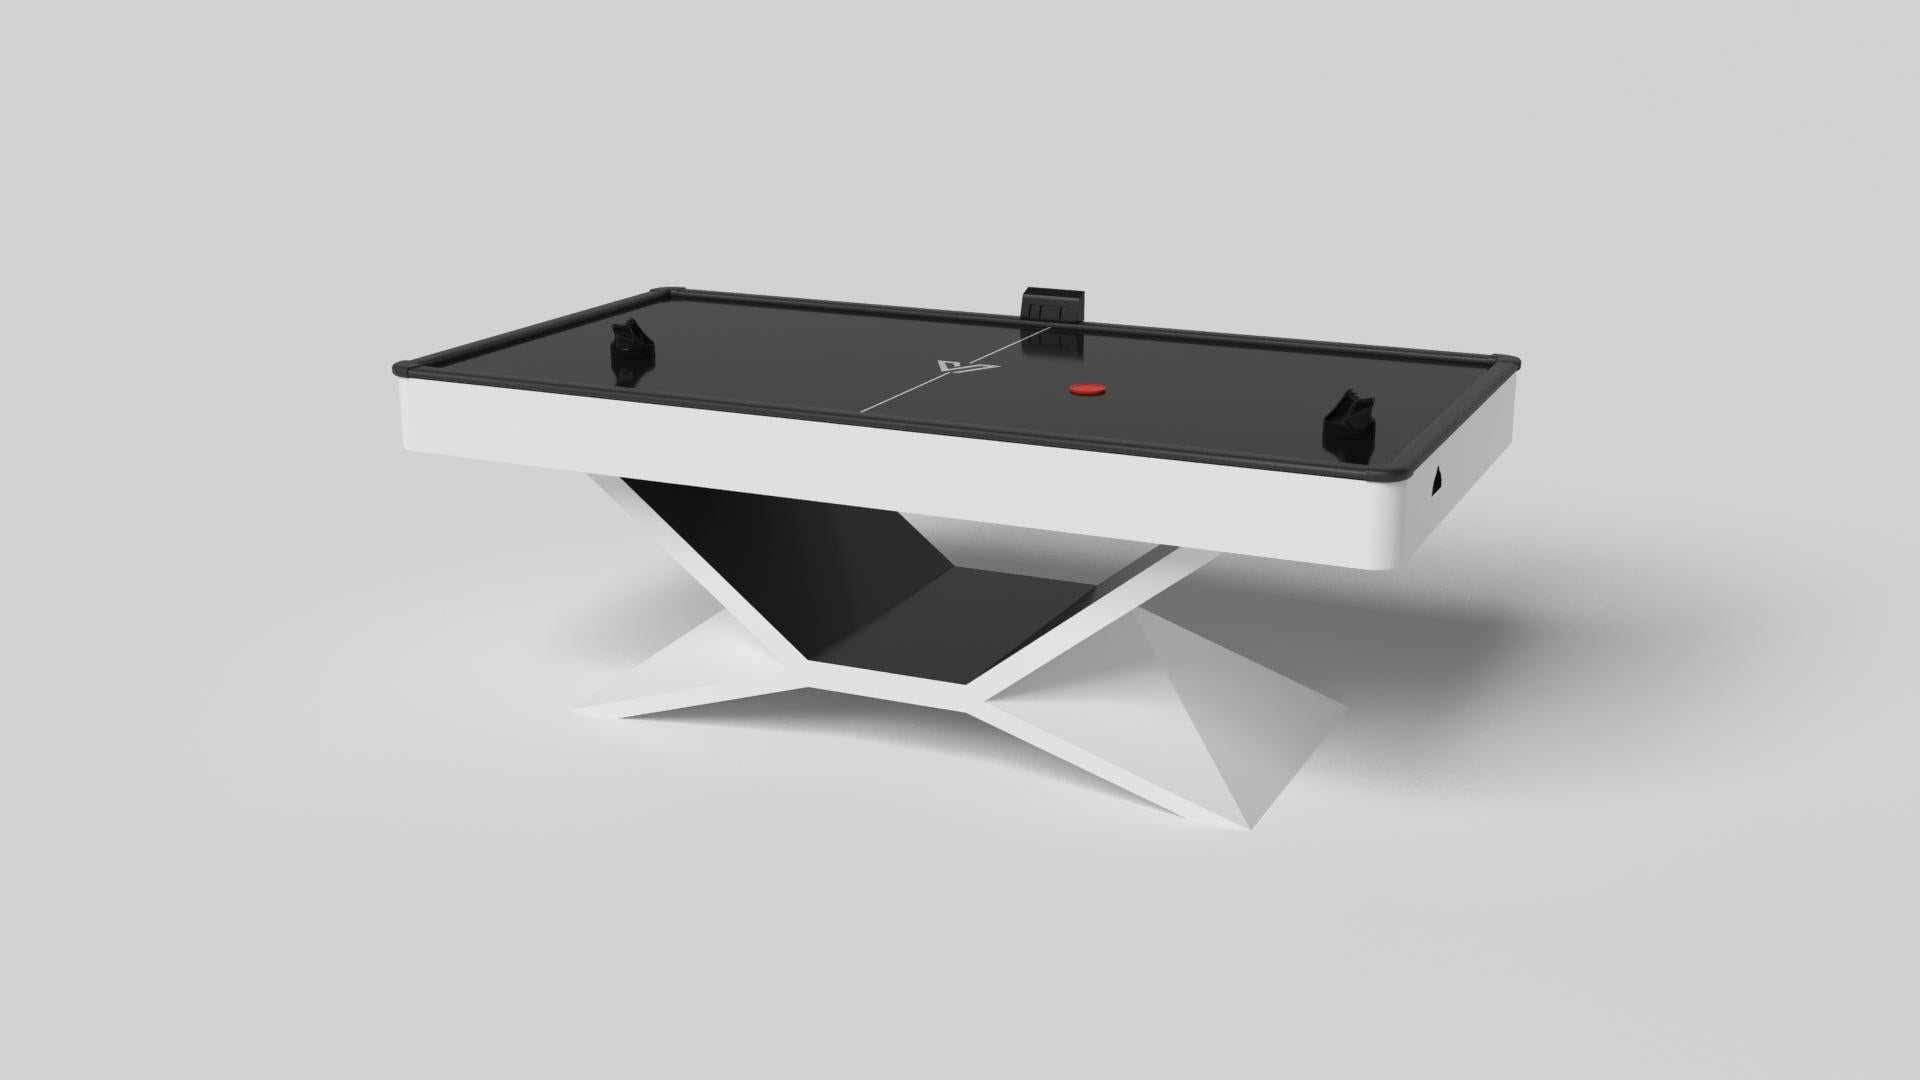 In chrome metal, the Kors air hockey table is a superior example of contrasting geometric forms. This table features an angular base that highlights the beauty of negative space from the front view. From the side view, it offers a completely